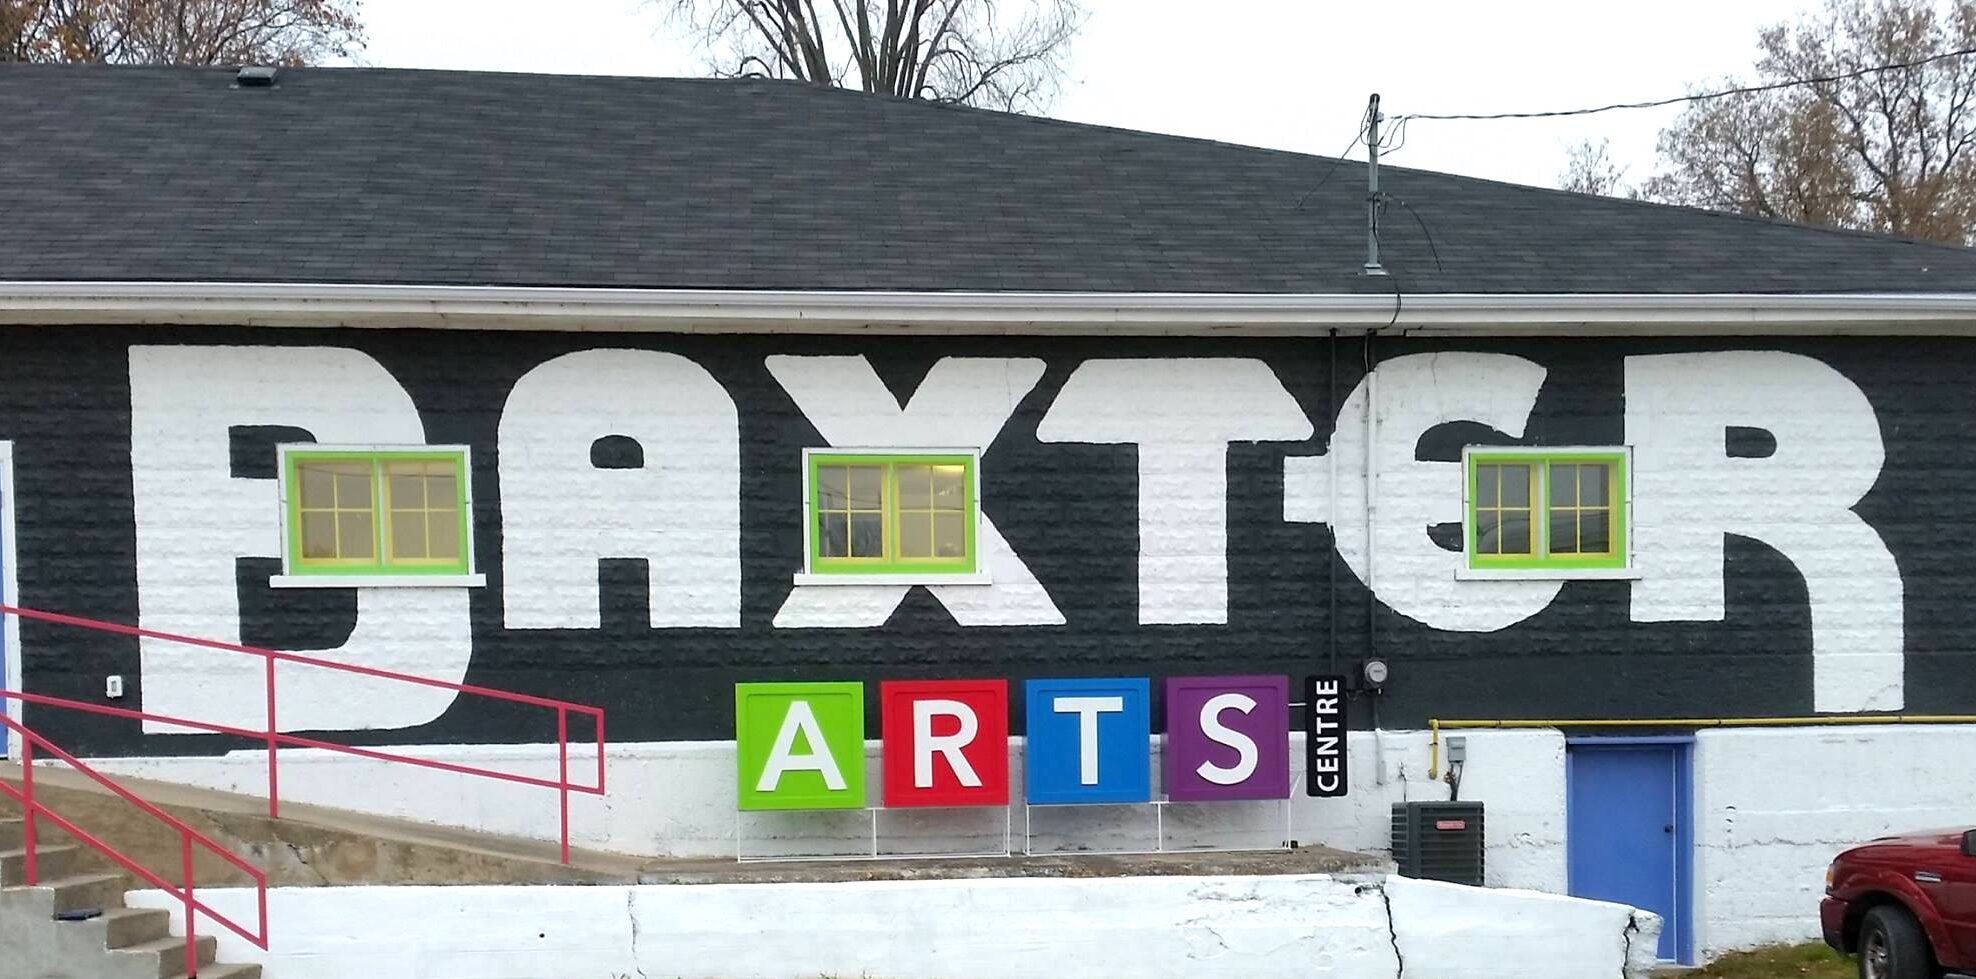 A photo of the exterior of the Baxter Arts Centre building.